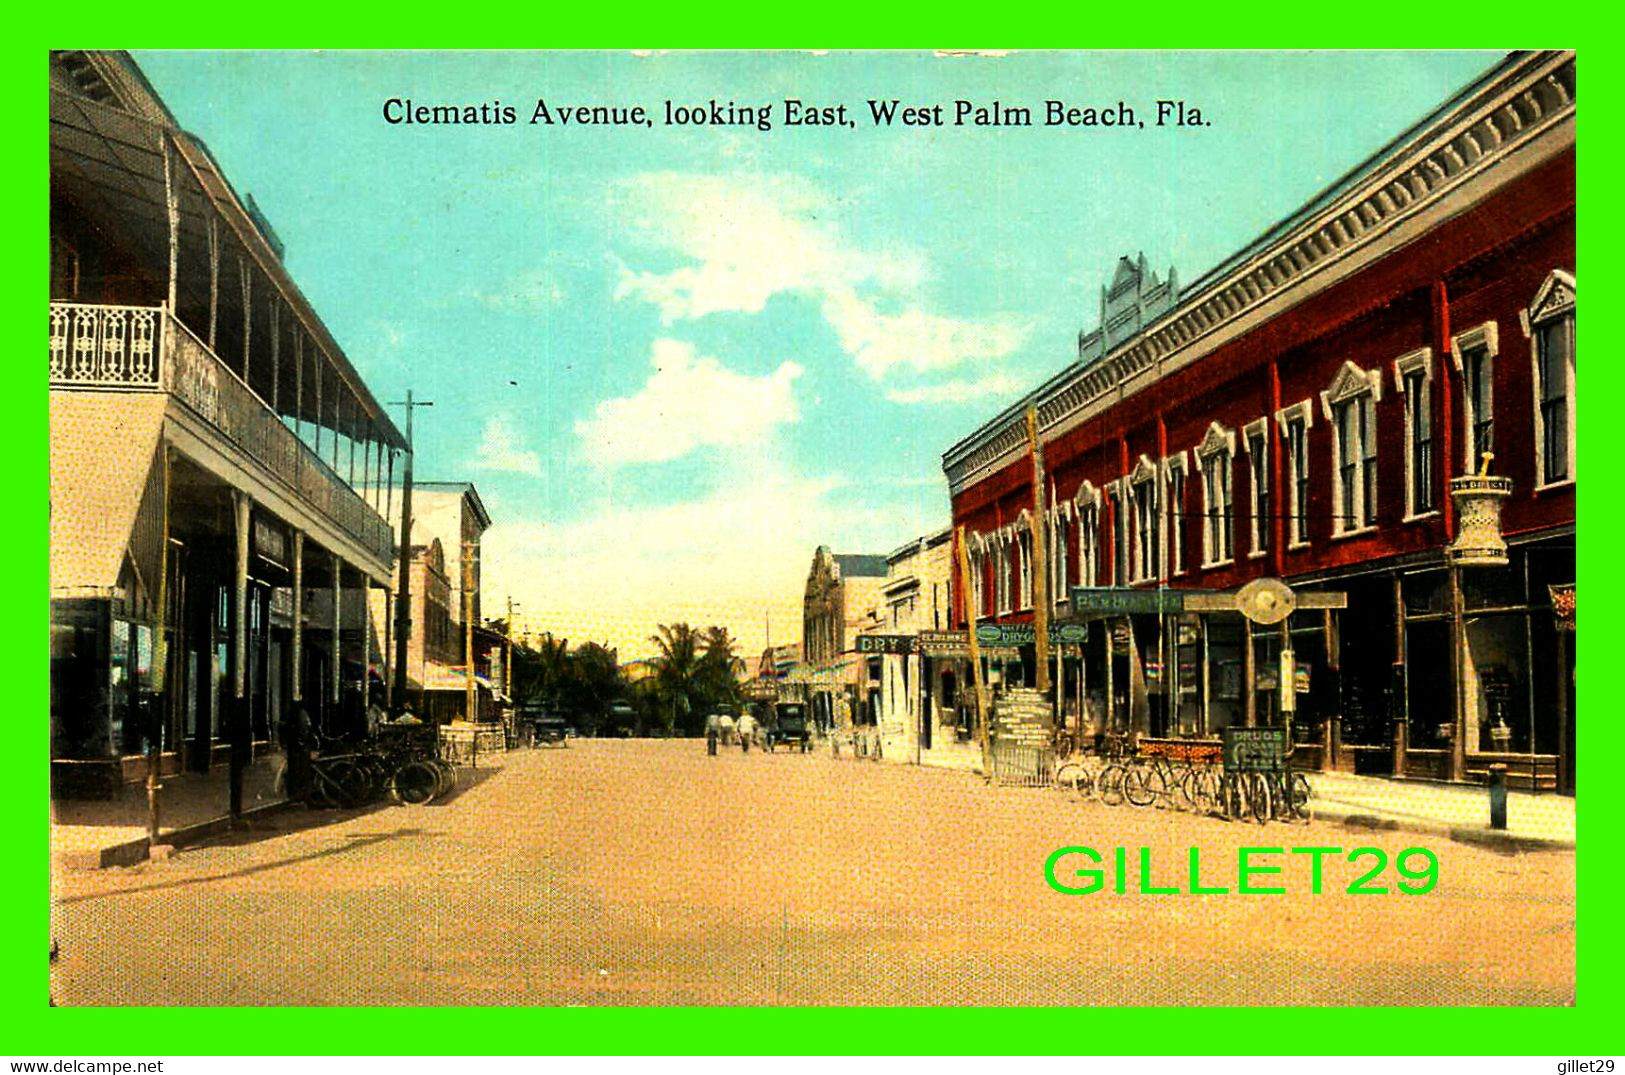 WEST PALM BEACH, FL - CLEMATIS AVENUE, LOOKING EAST - ANIMATED WITH BICYCLES - PUB BY THE H. & W.B. DREW CO - - West Palm Beach